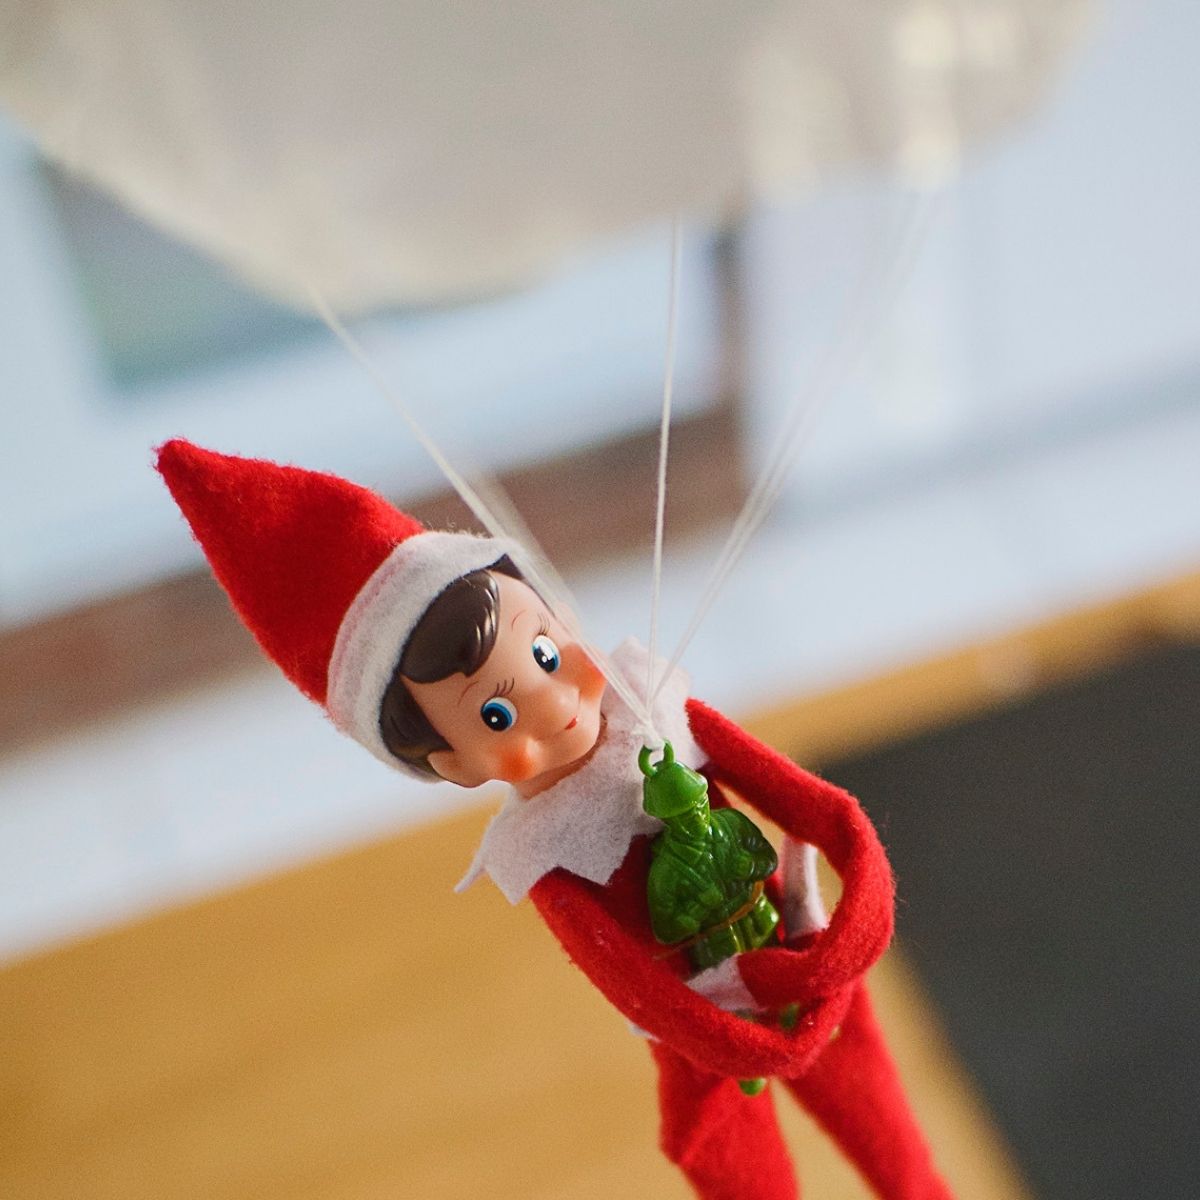 An Elf on the Shelf parachutes with a green army man toy in his arms.